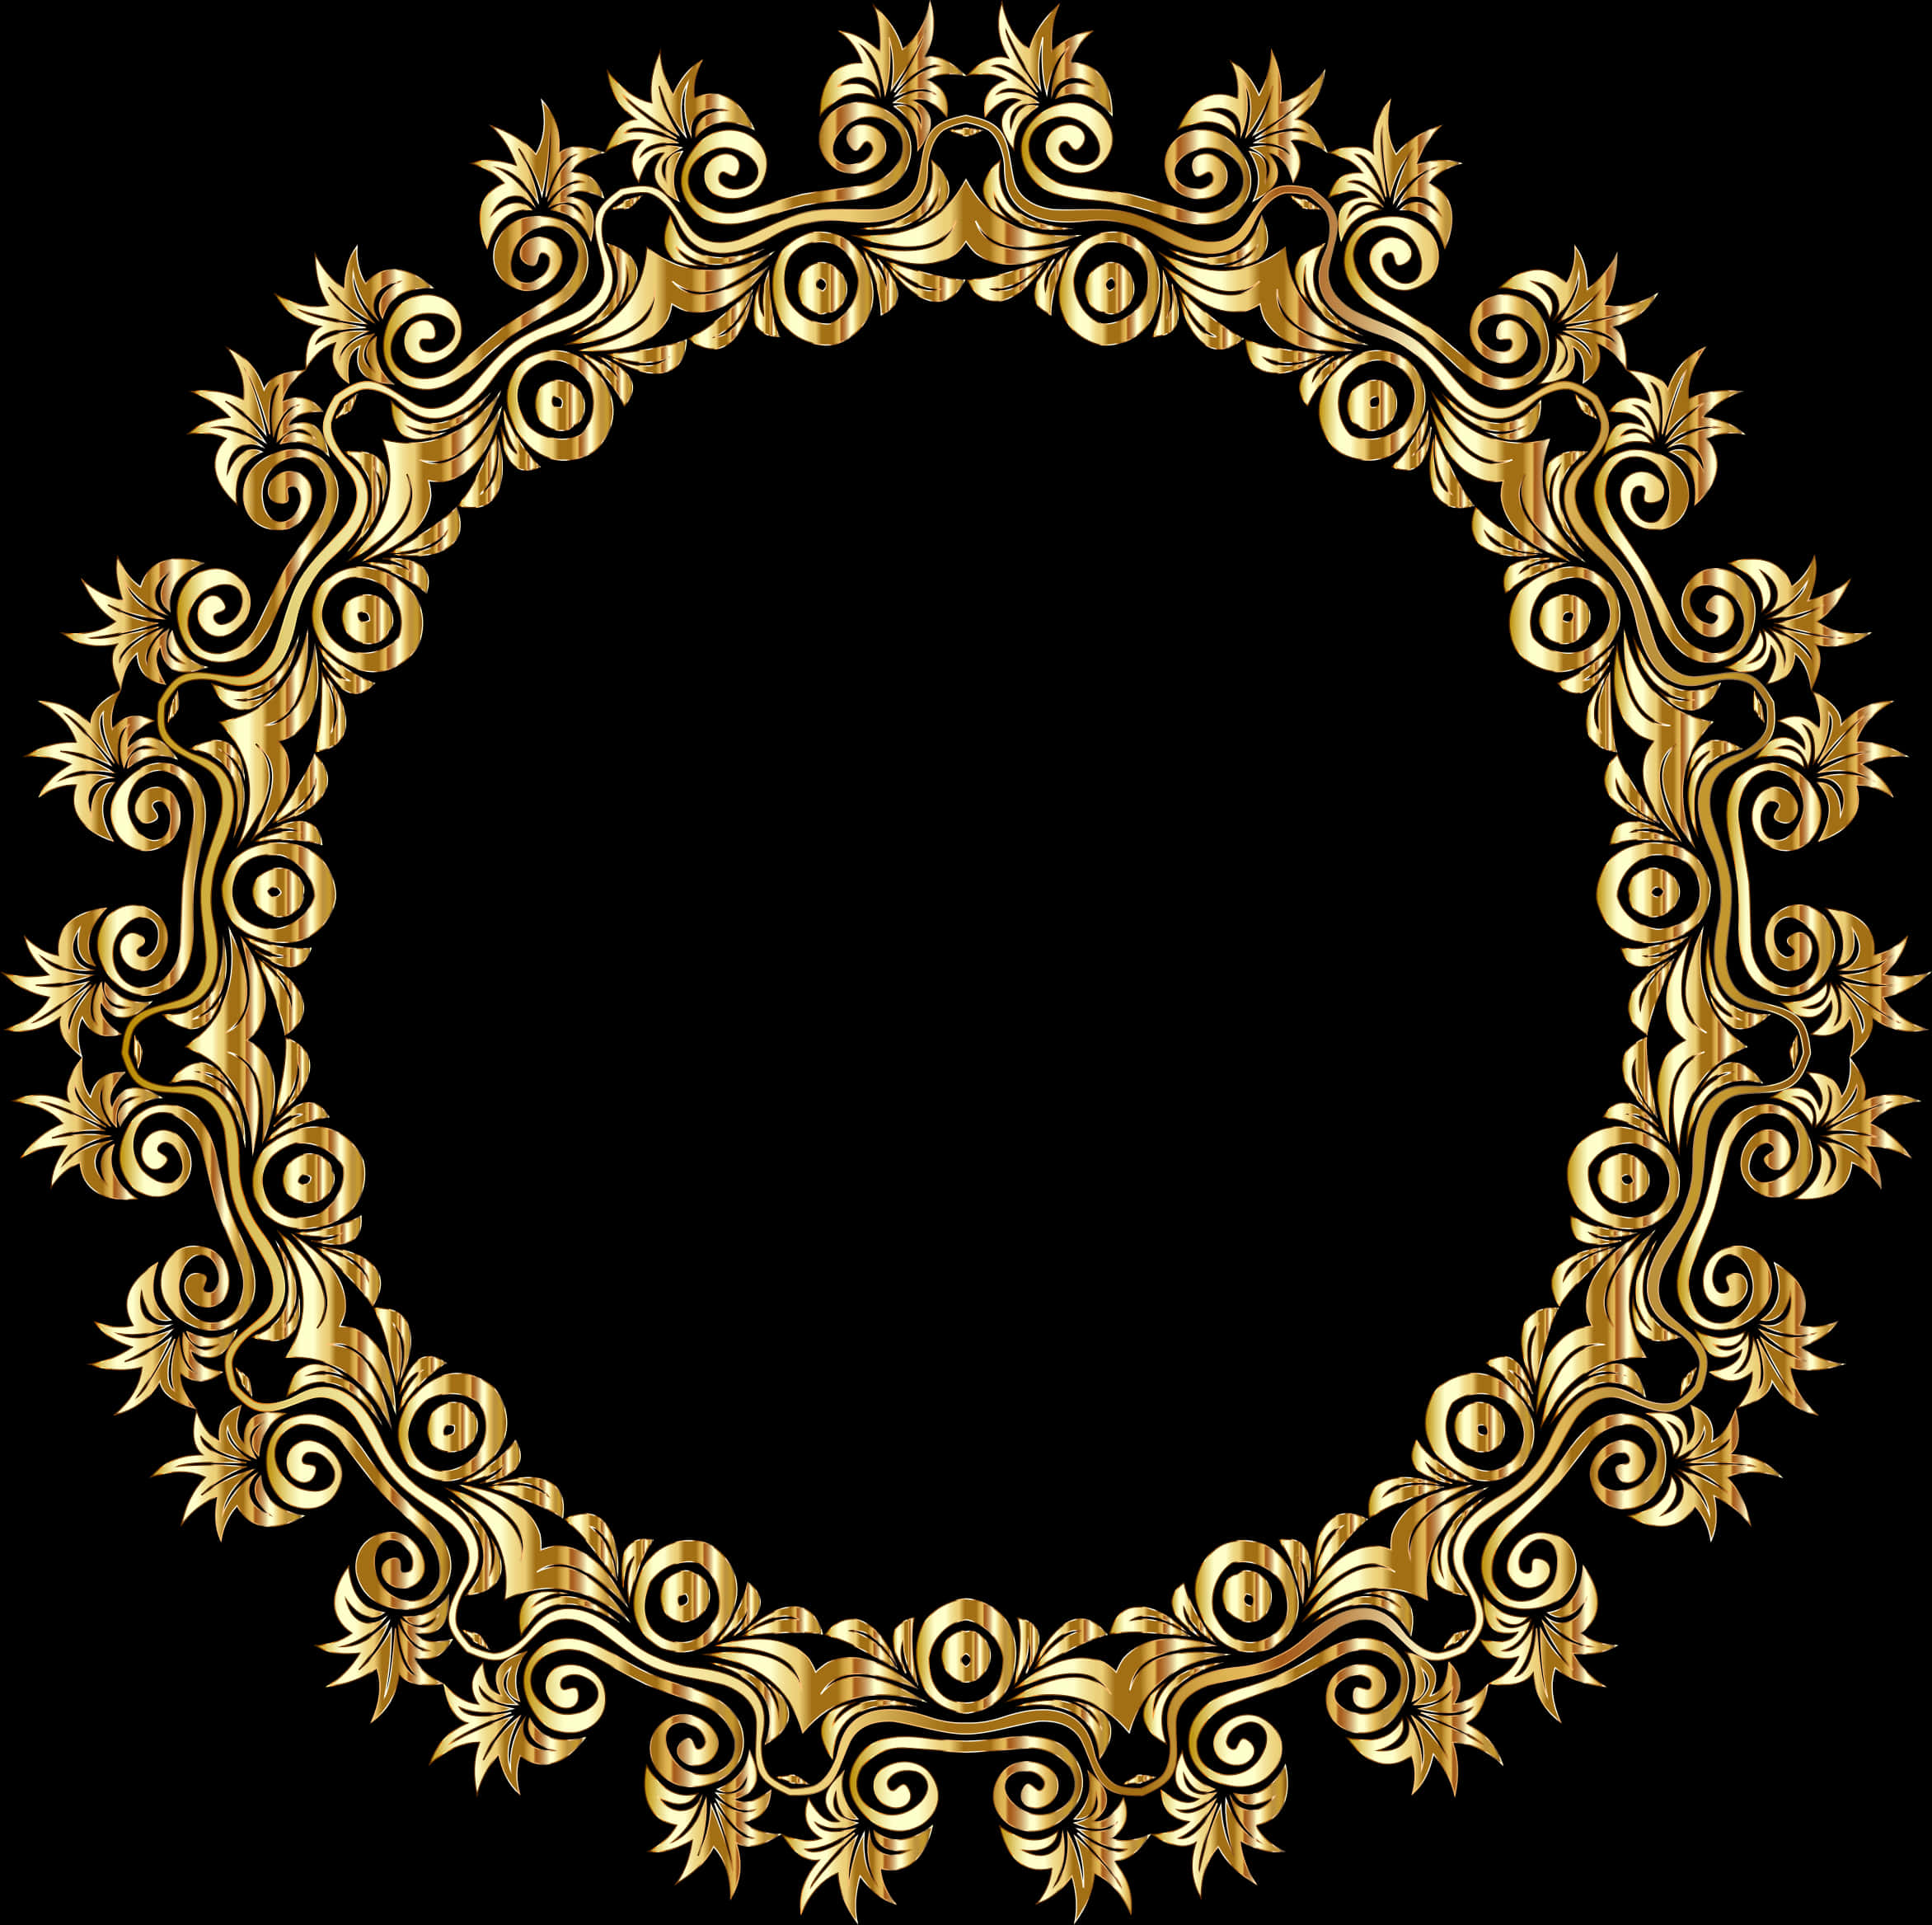 A Gold Circular Frame With Swirls And Leaves